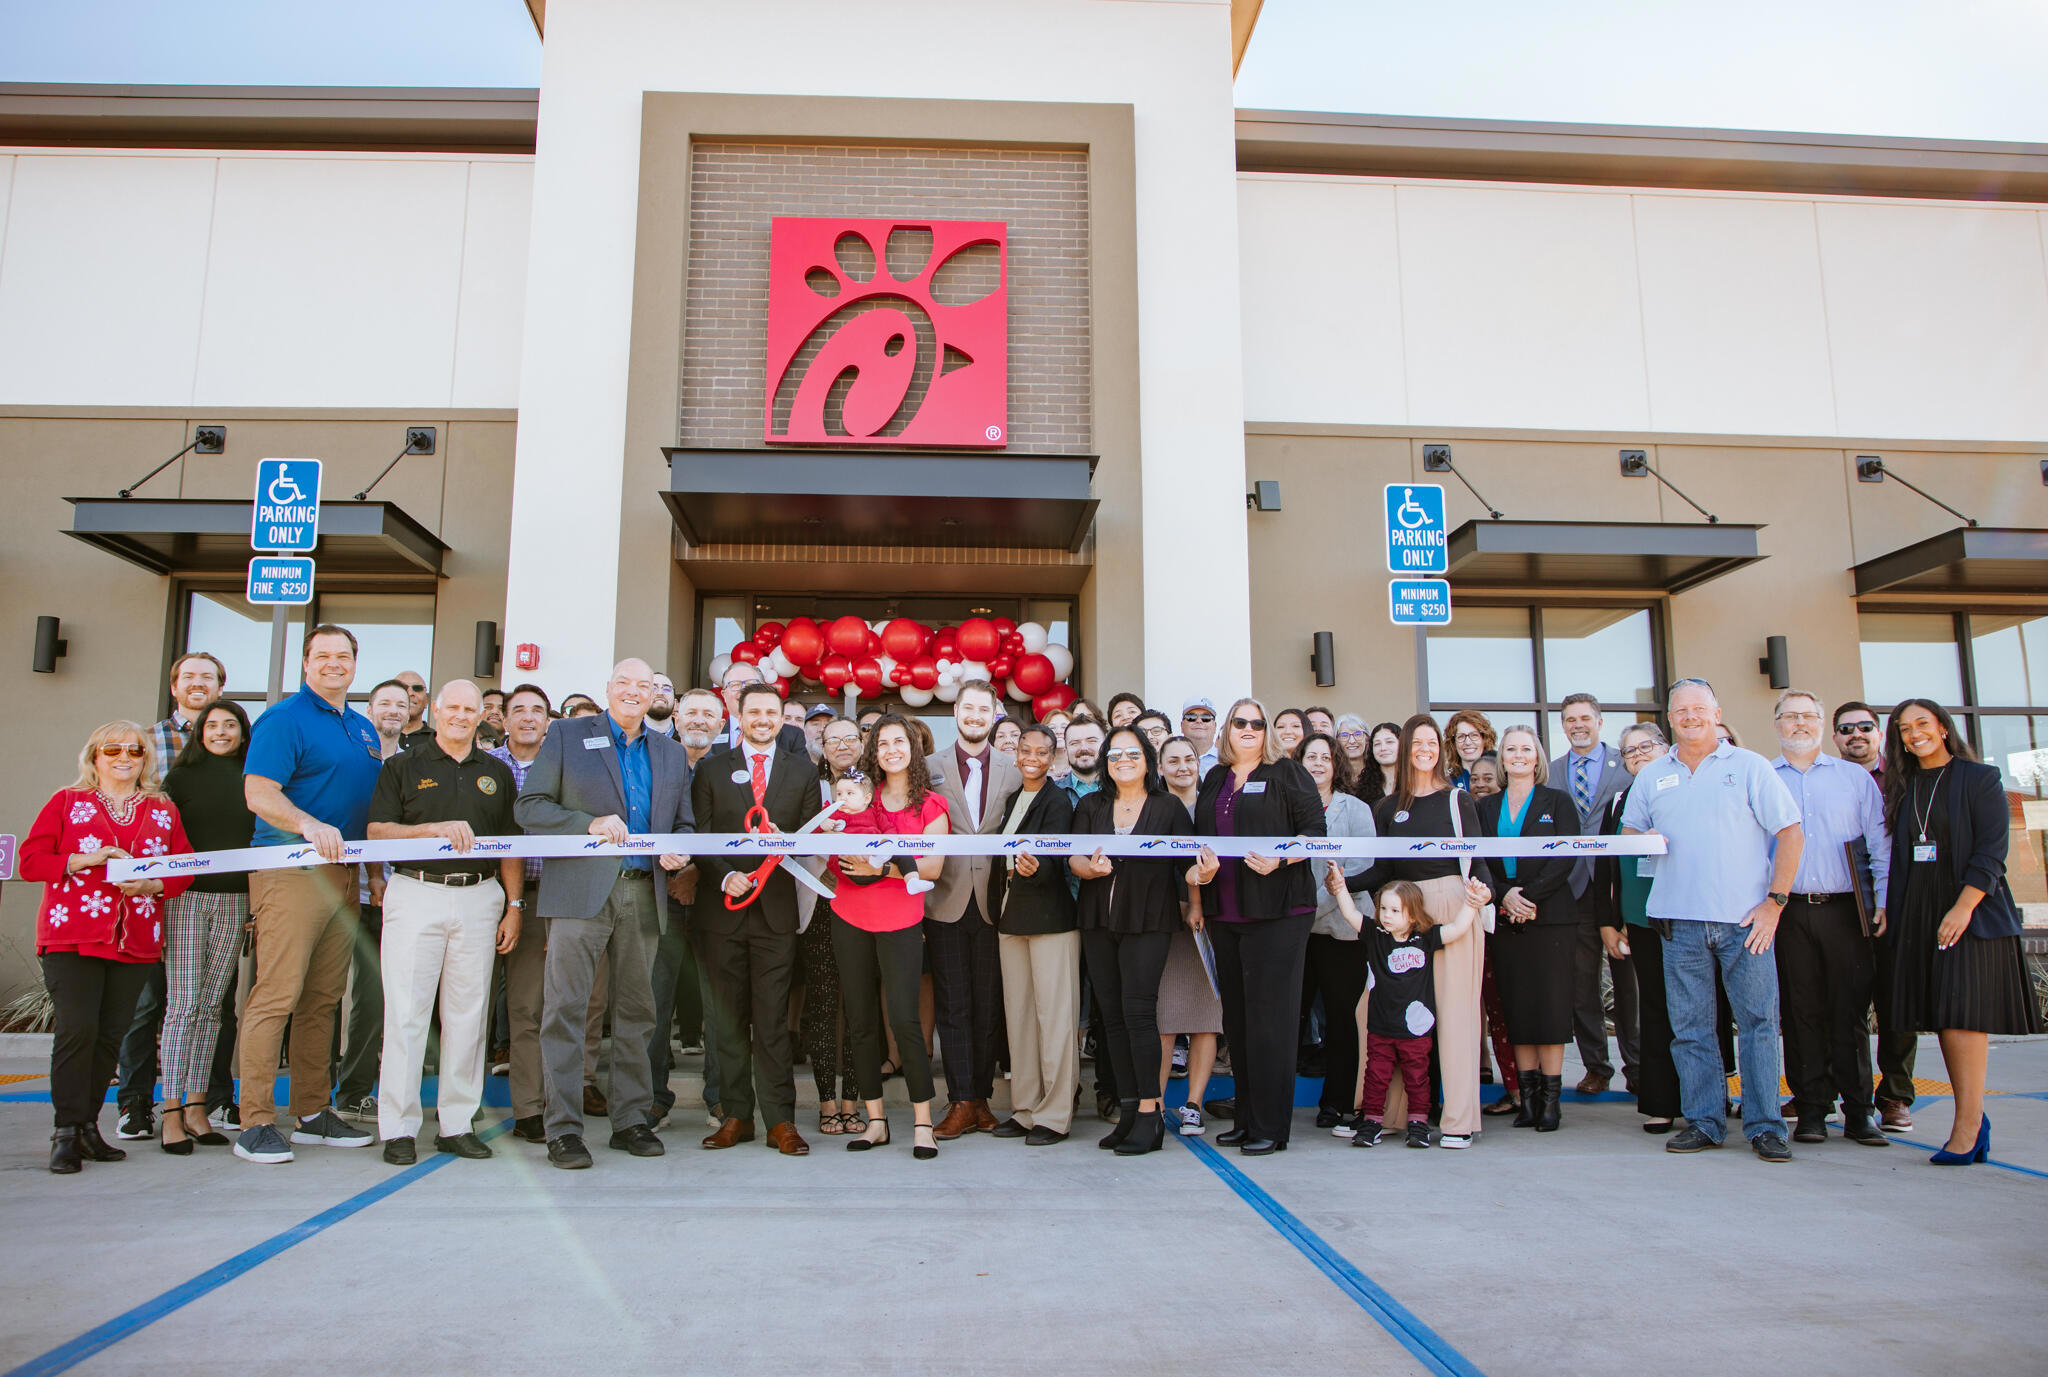 This morning, we cut the ribbon and officially ChickfilA to